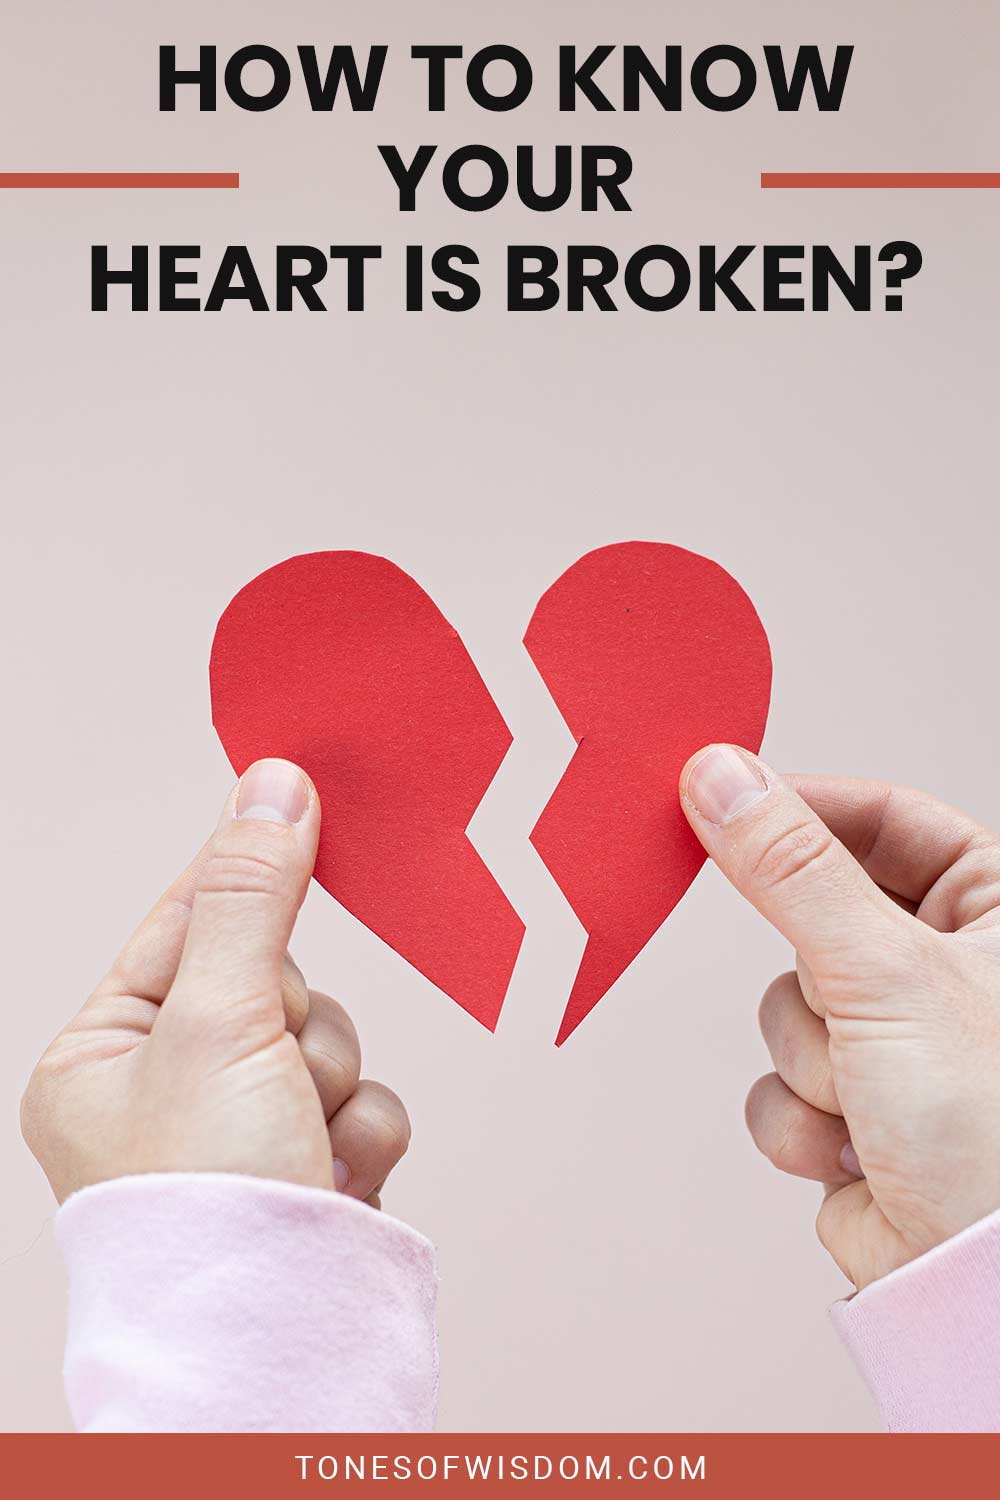 How To Know Your Heart Is Broken?